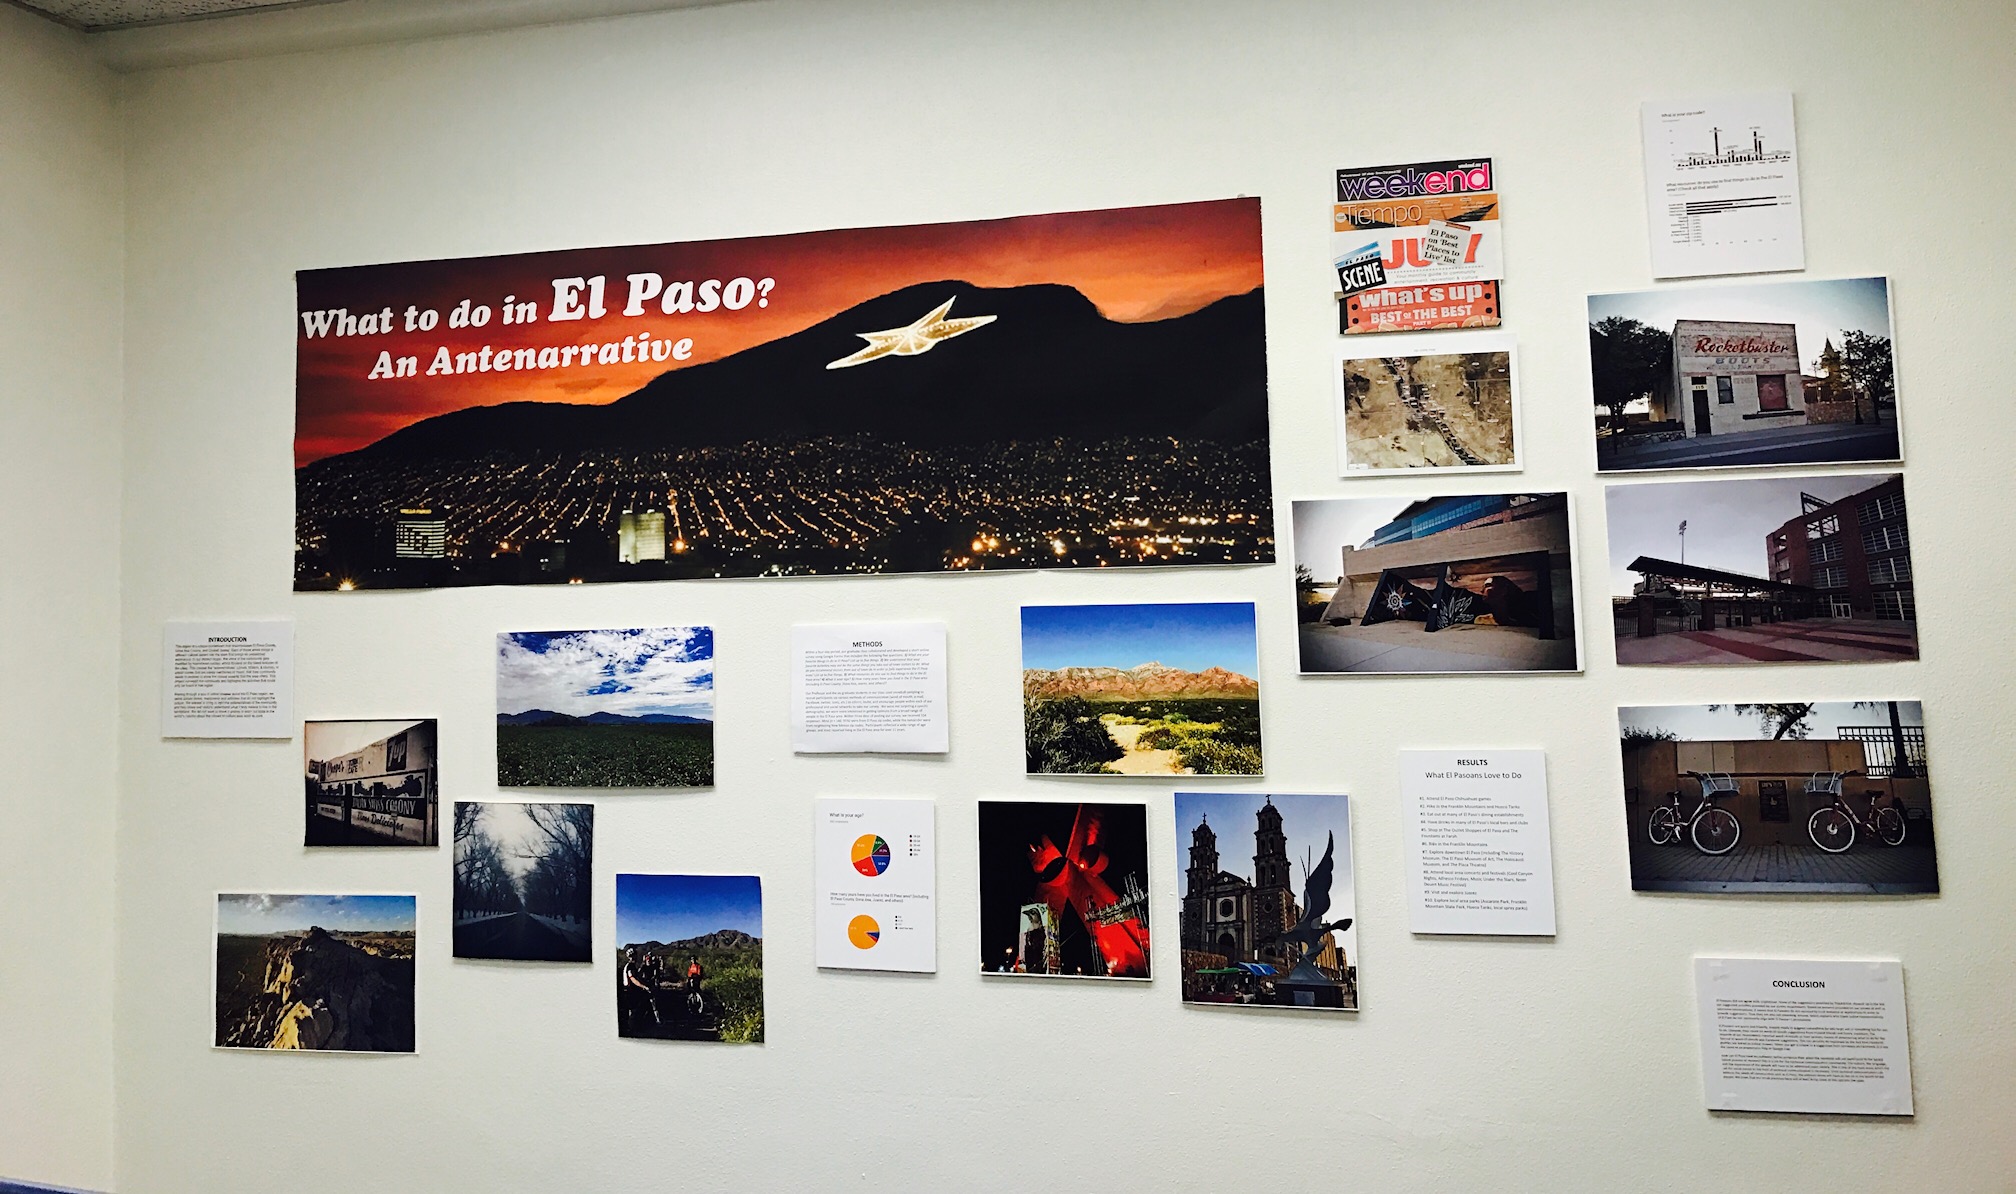 This picture reflects some of the ways in which we transformed data from our "What to do in El Paso" survey into an art exhibit that showcases different locations and activities in and around El Paso.